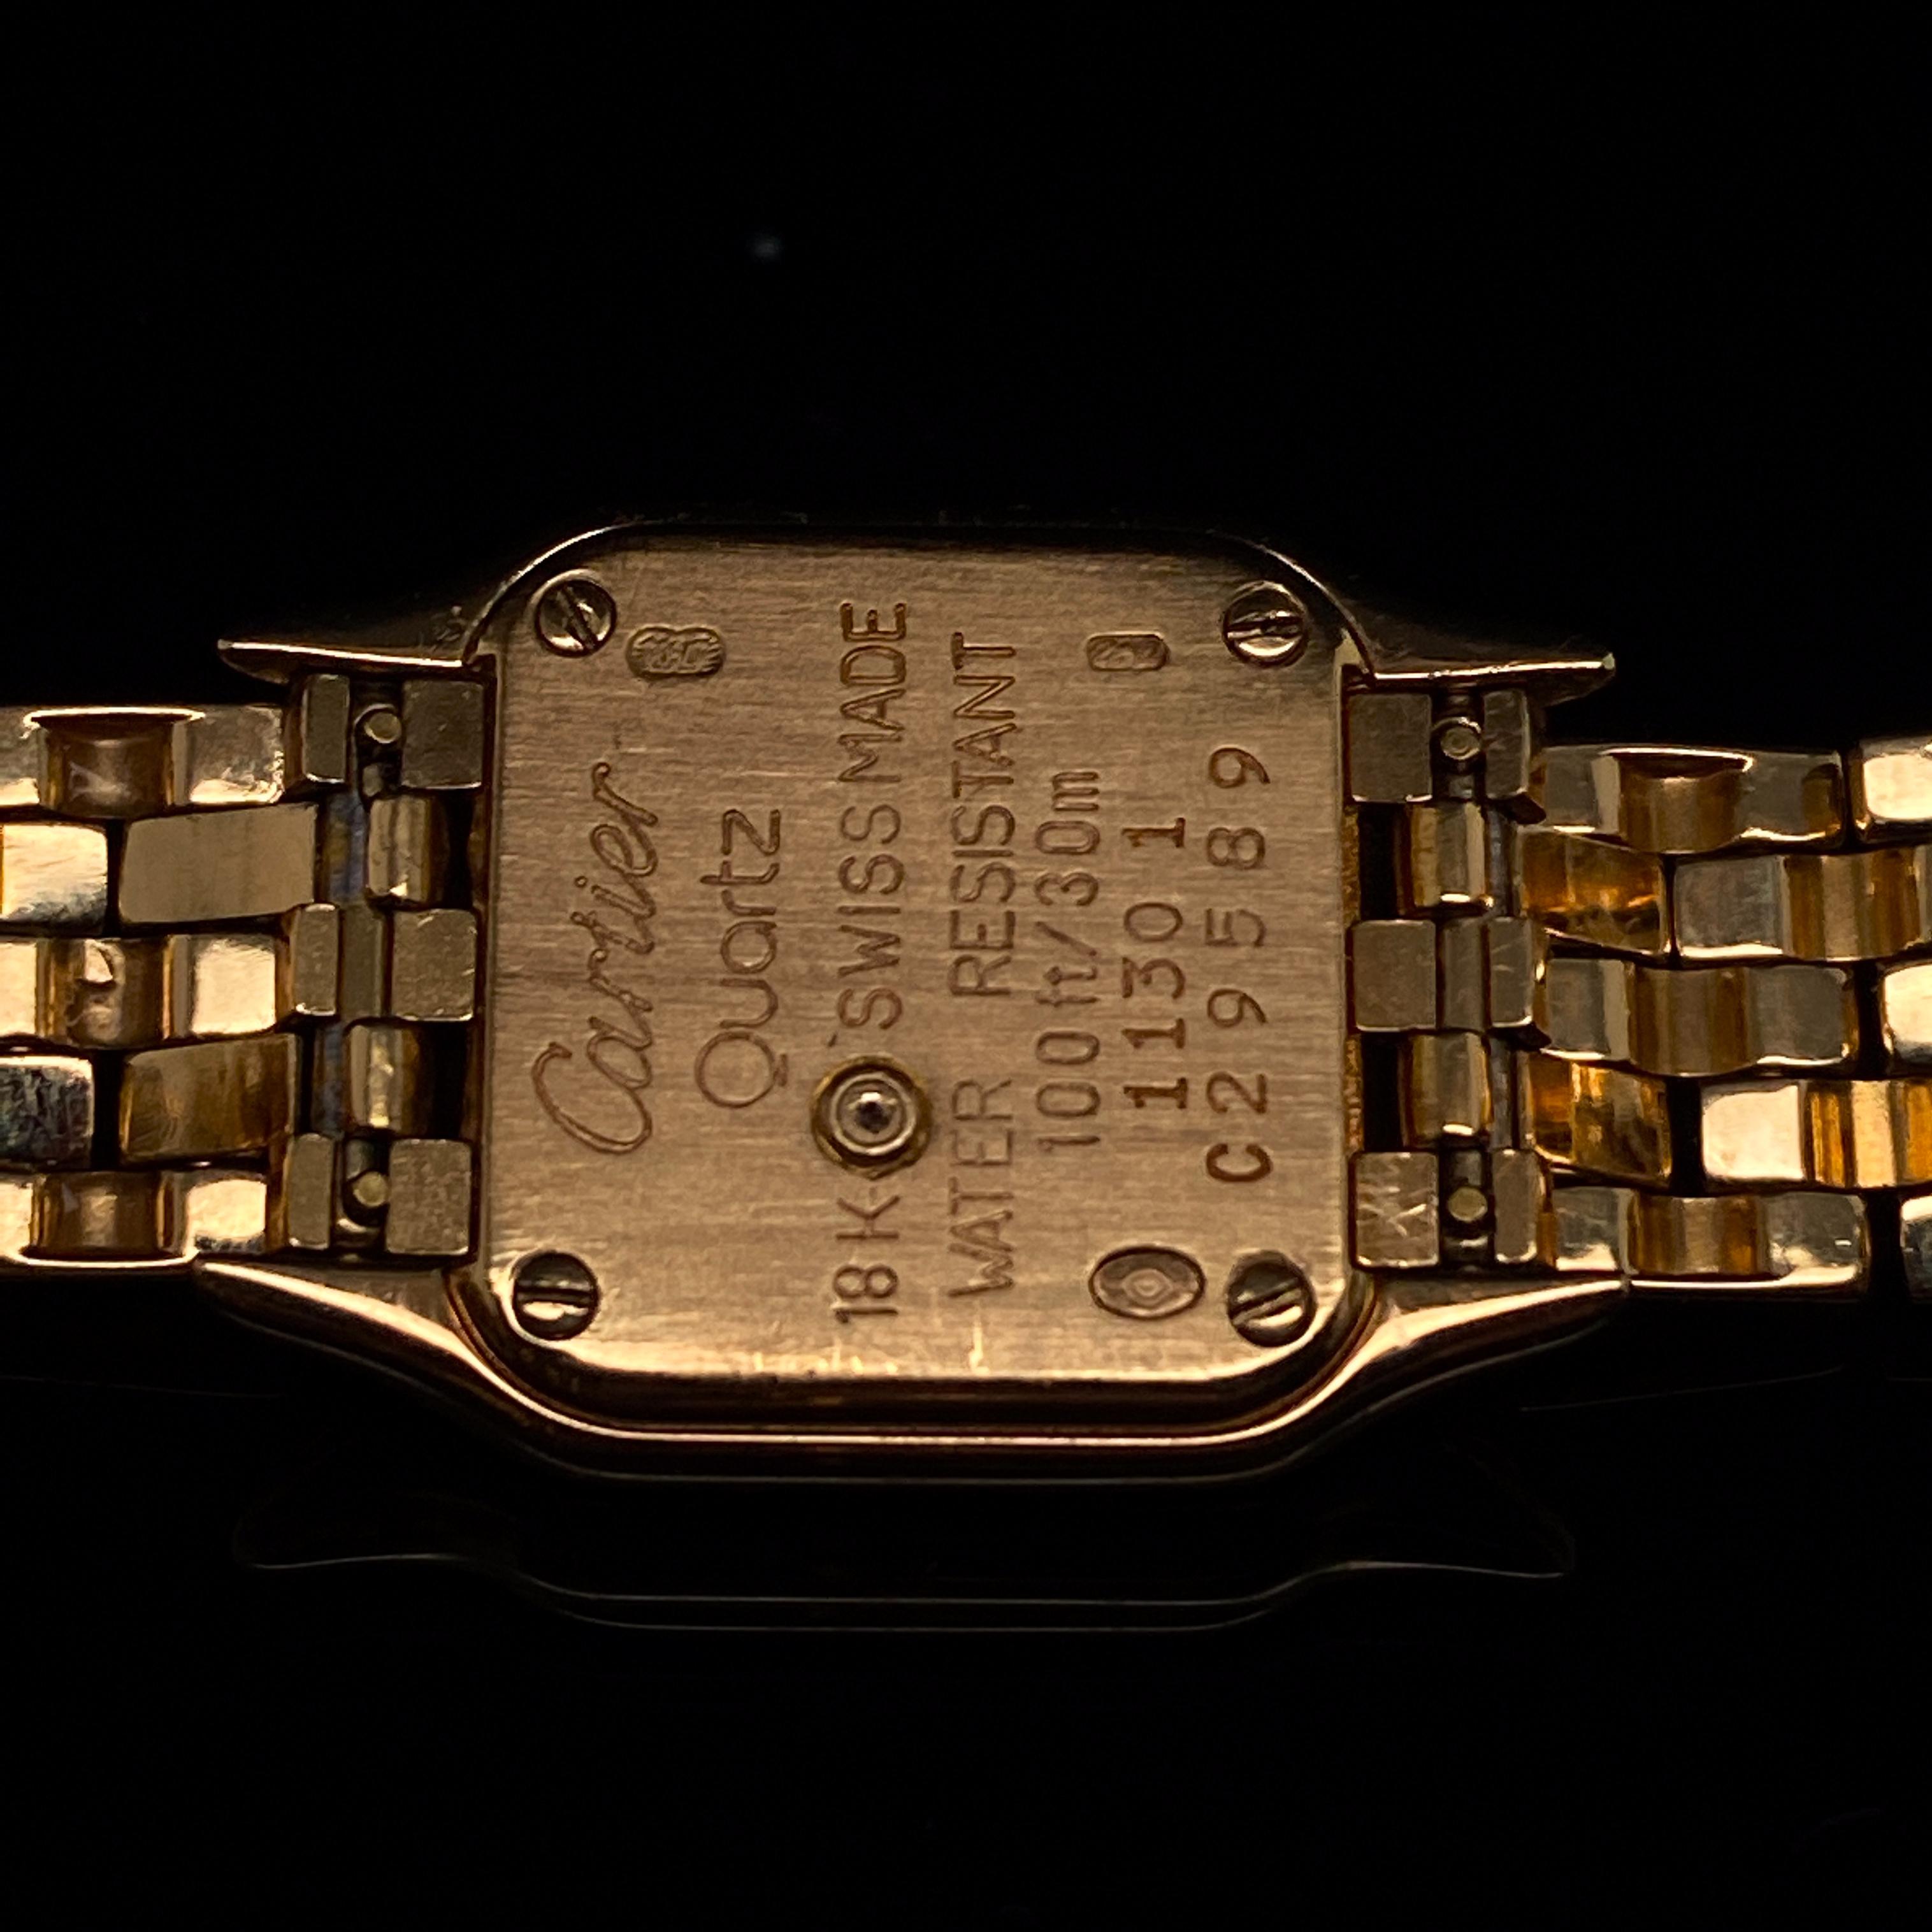 Cartier Panthère Mini 18 Karat Yellow Gold Quartz Ladies Wristwatch Circa 1990

A rare lady’s Cartier Panthere Mini quartz wrist-watch of 18 karat yellow gold. 

With a white dial, Roman numerals and a shaped casing
signed 